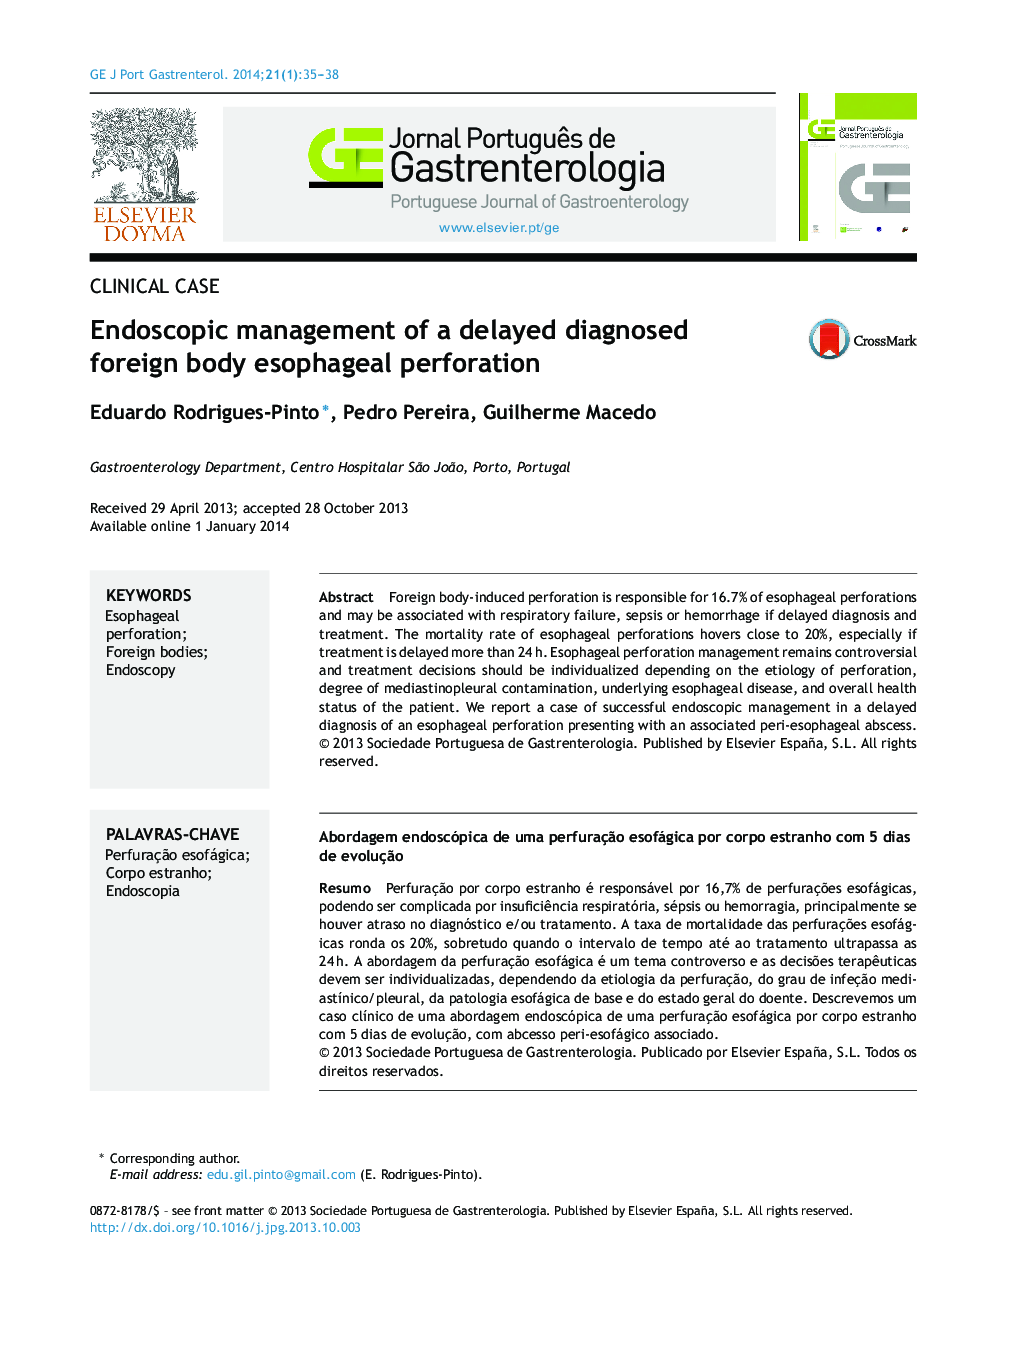 Endoscopic management of a delayed diagnosed foreign body esophageal perforation